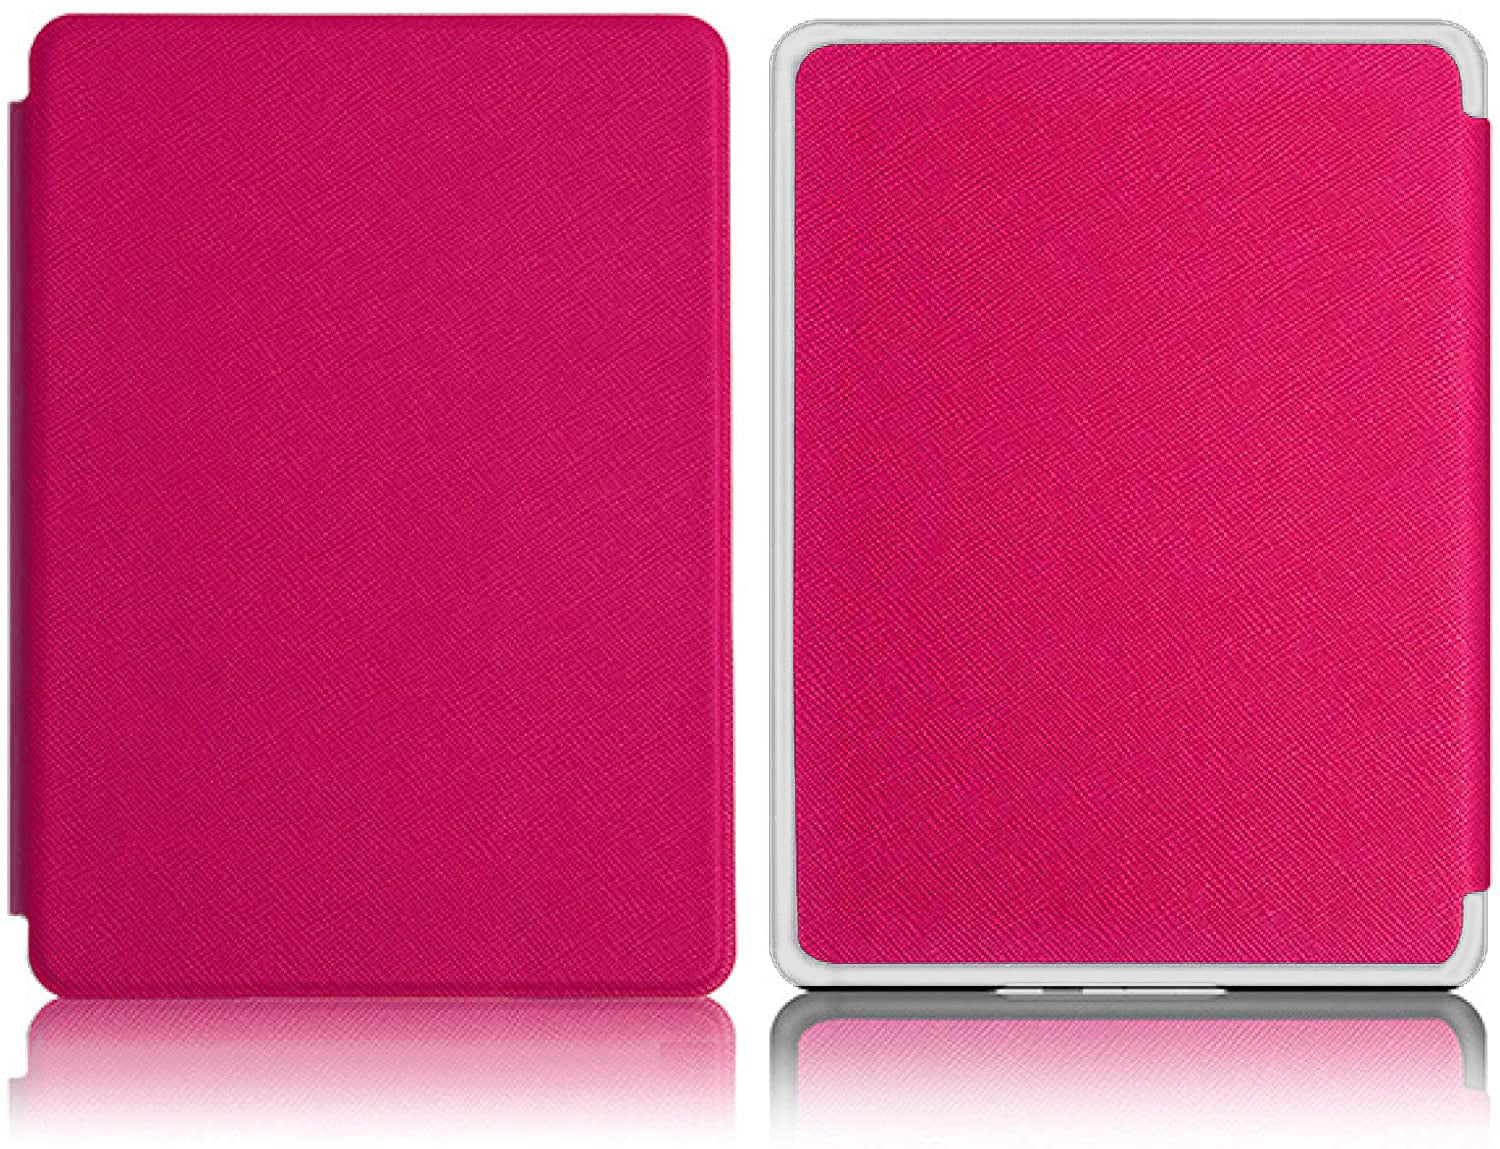 Moko case for 2014 kindle 7 Ultra Slim Cover for Kindle Touch Auto Sleep Wake Protective Shell Leather- MAGENTA - e4cents